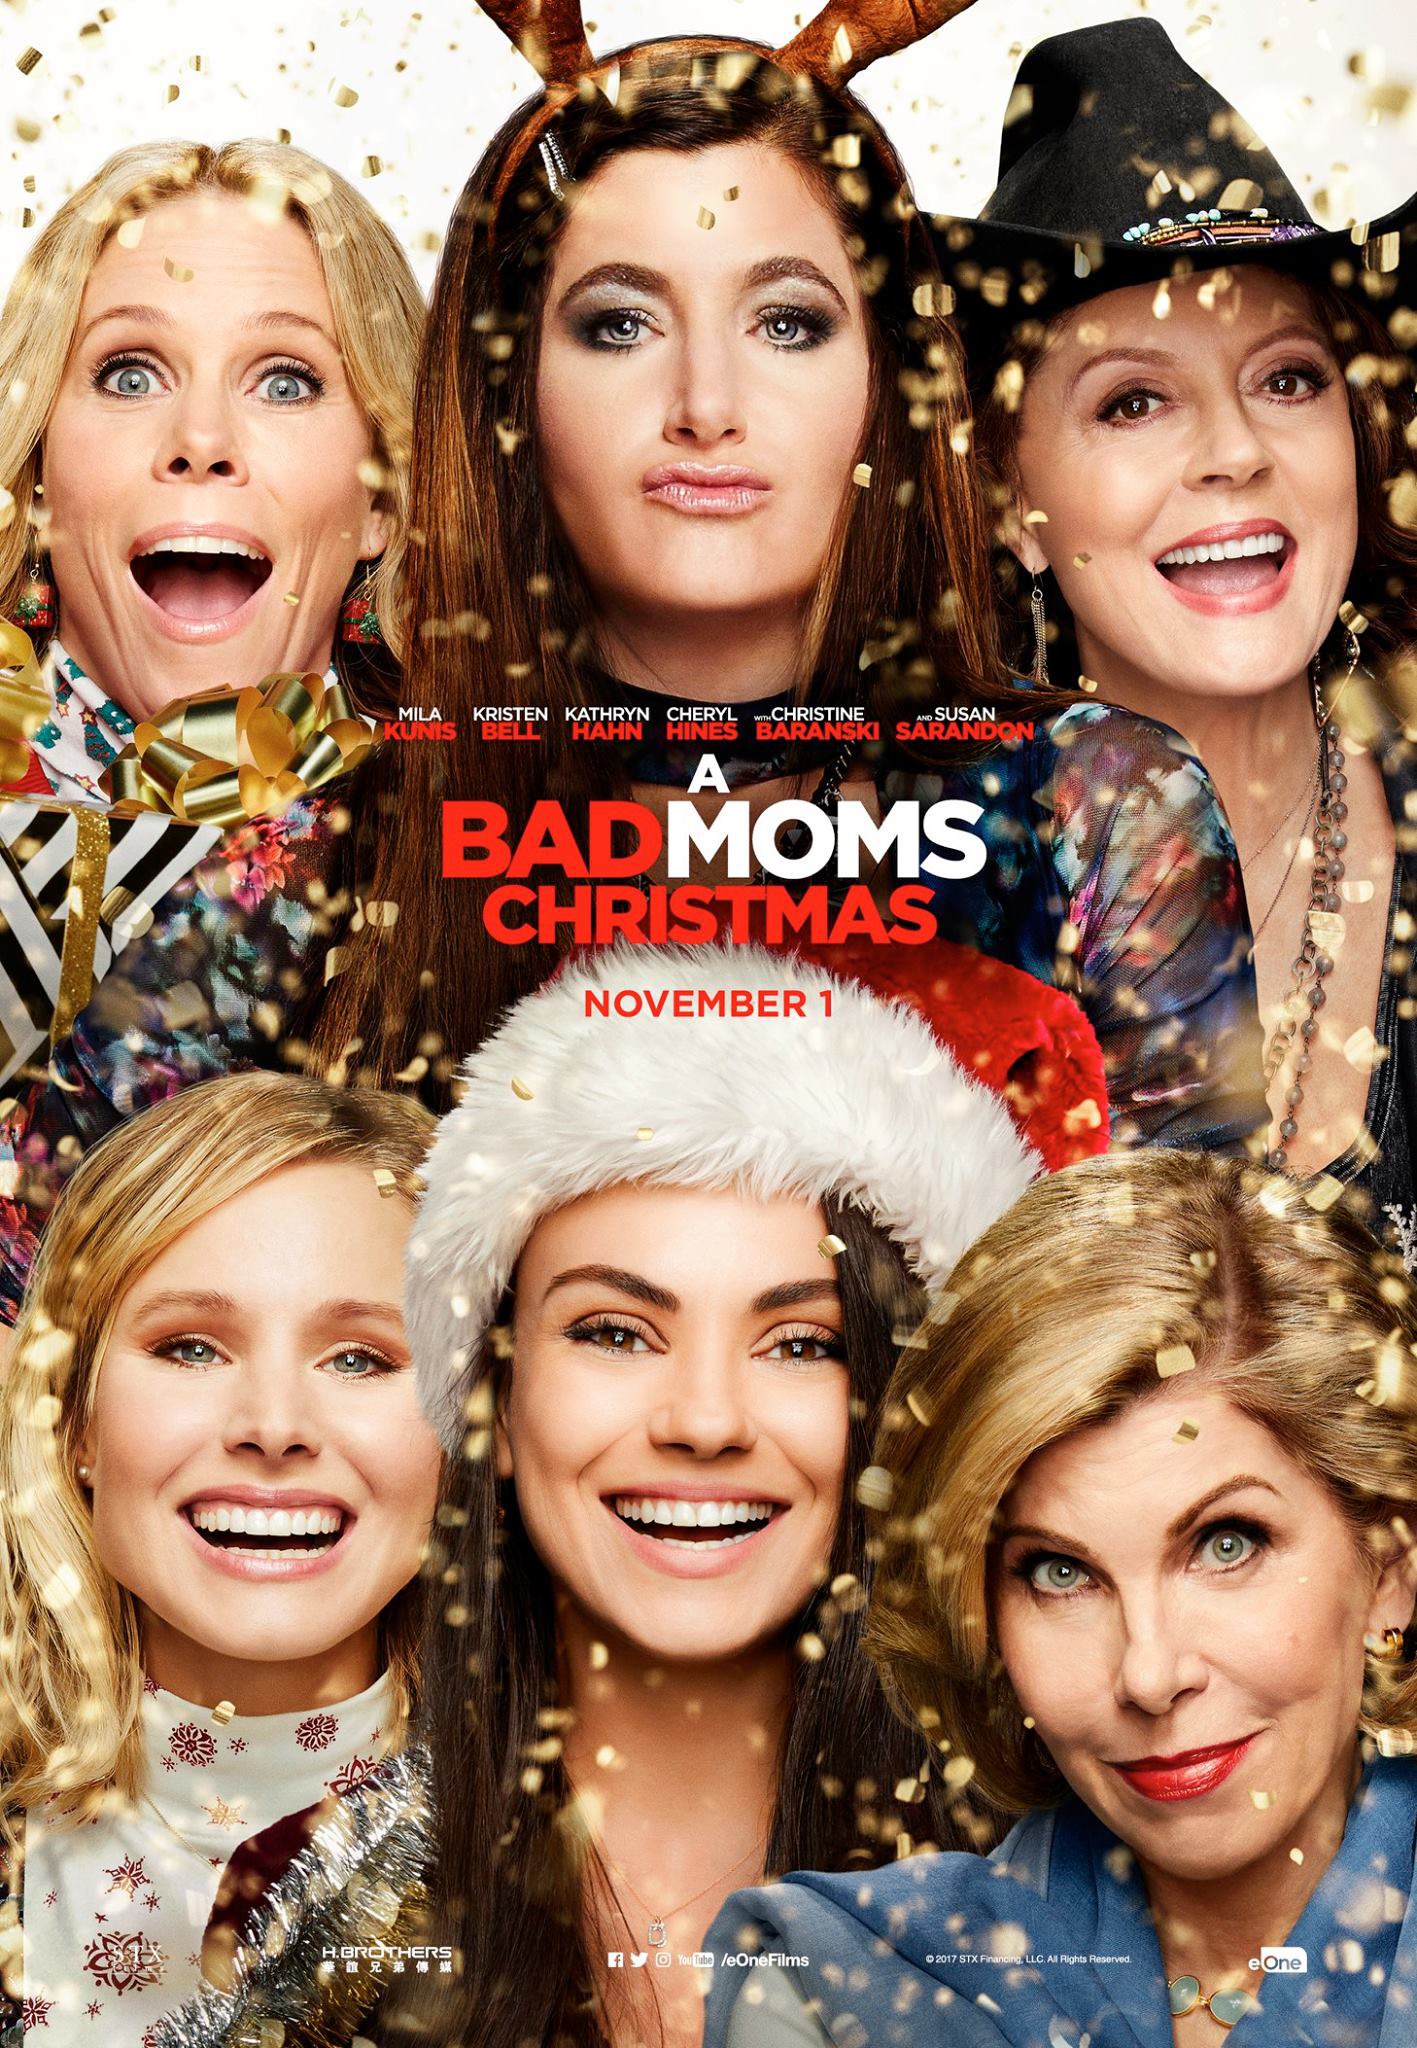 Mega Sized Movie Poster Image for A Bad Moms Christmas (#6 of 10)